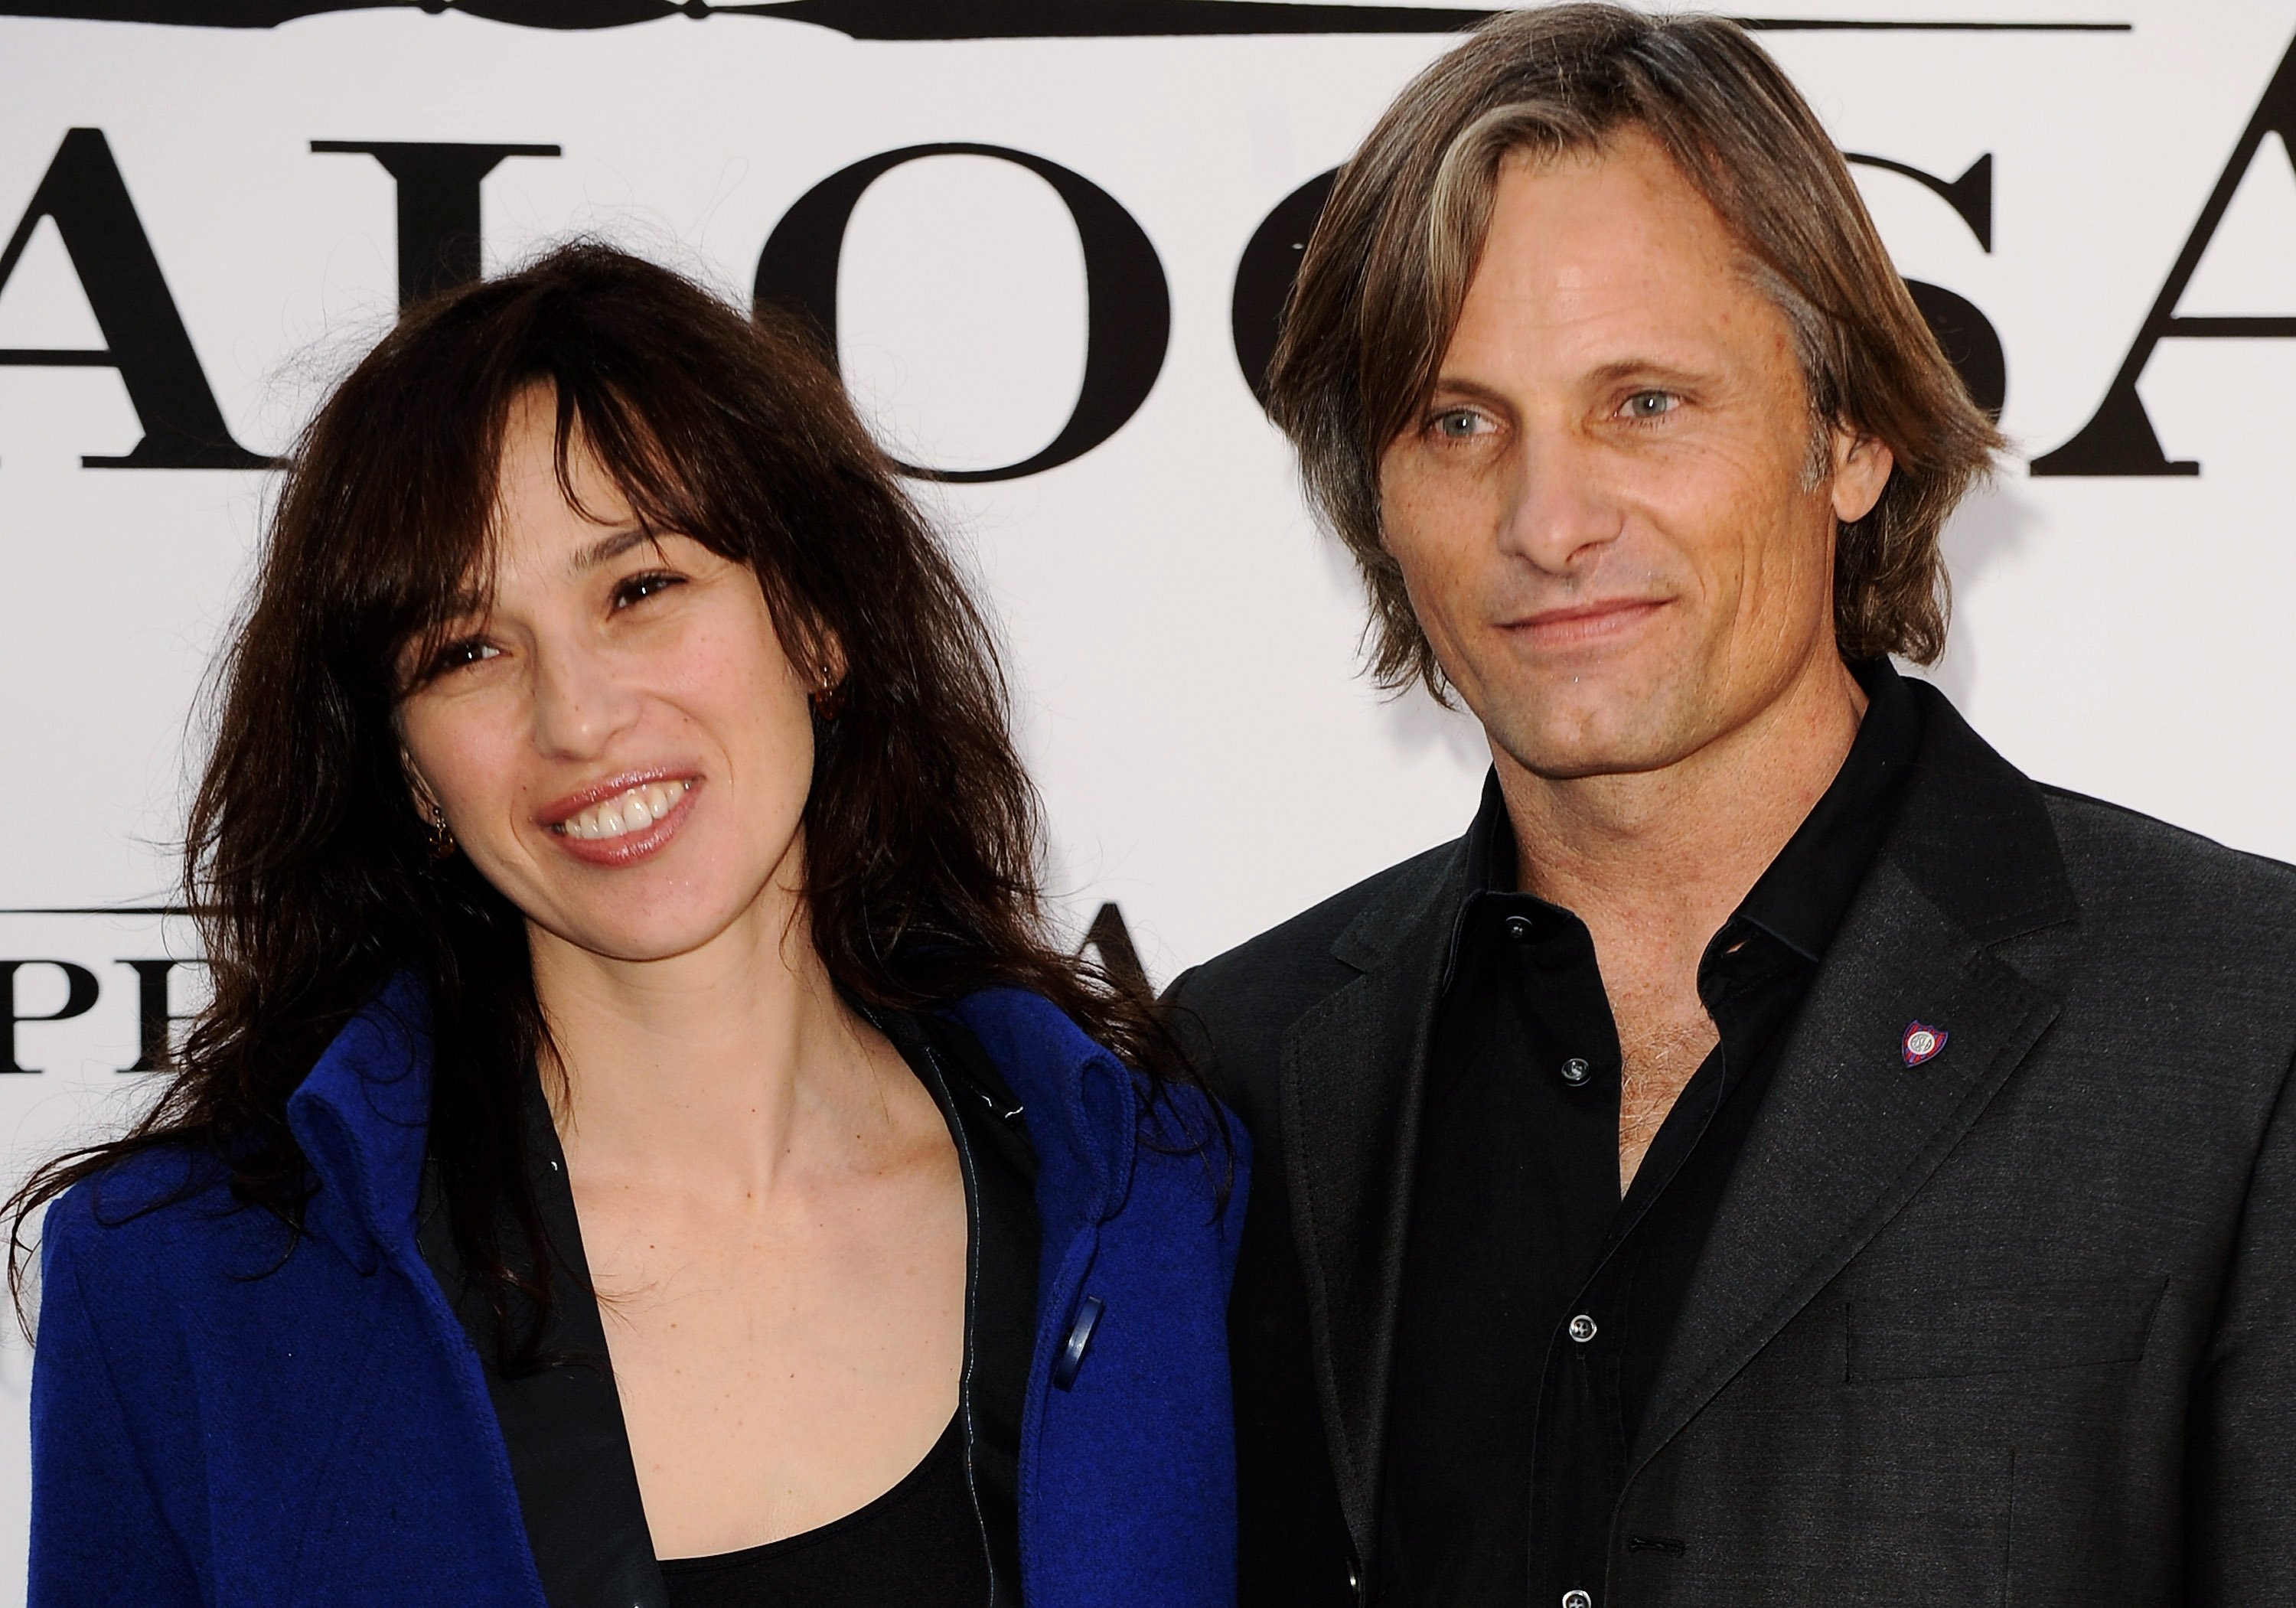 Spanish actress Ariadna Gil and Danish-American actor Viggo Mortensen attend the "Appaloosa" photocall on November 20 , 2008, in Madrid, Spain. | Source: Getty Images